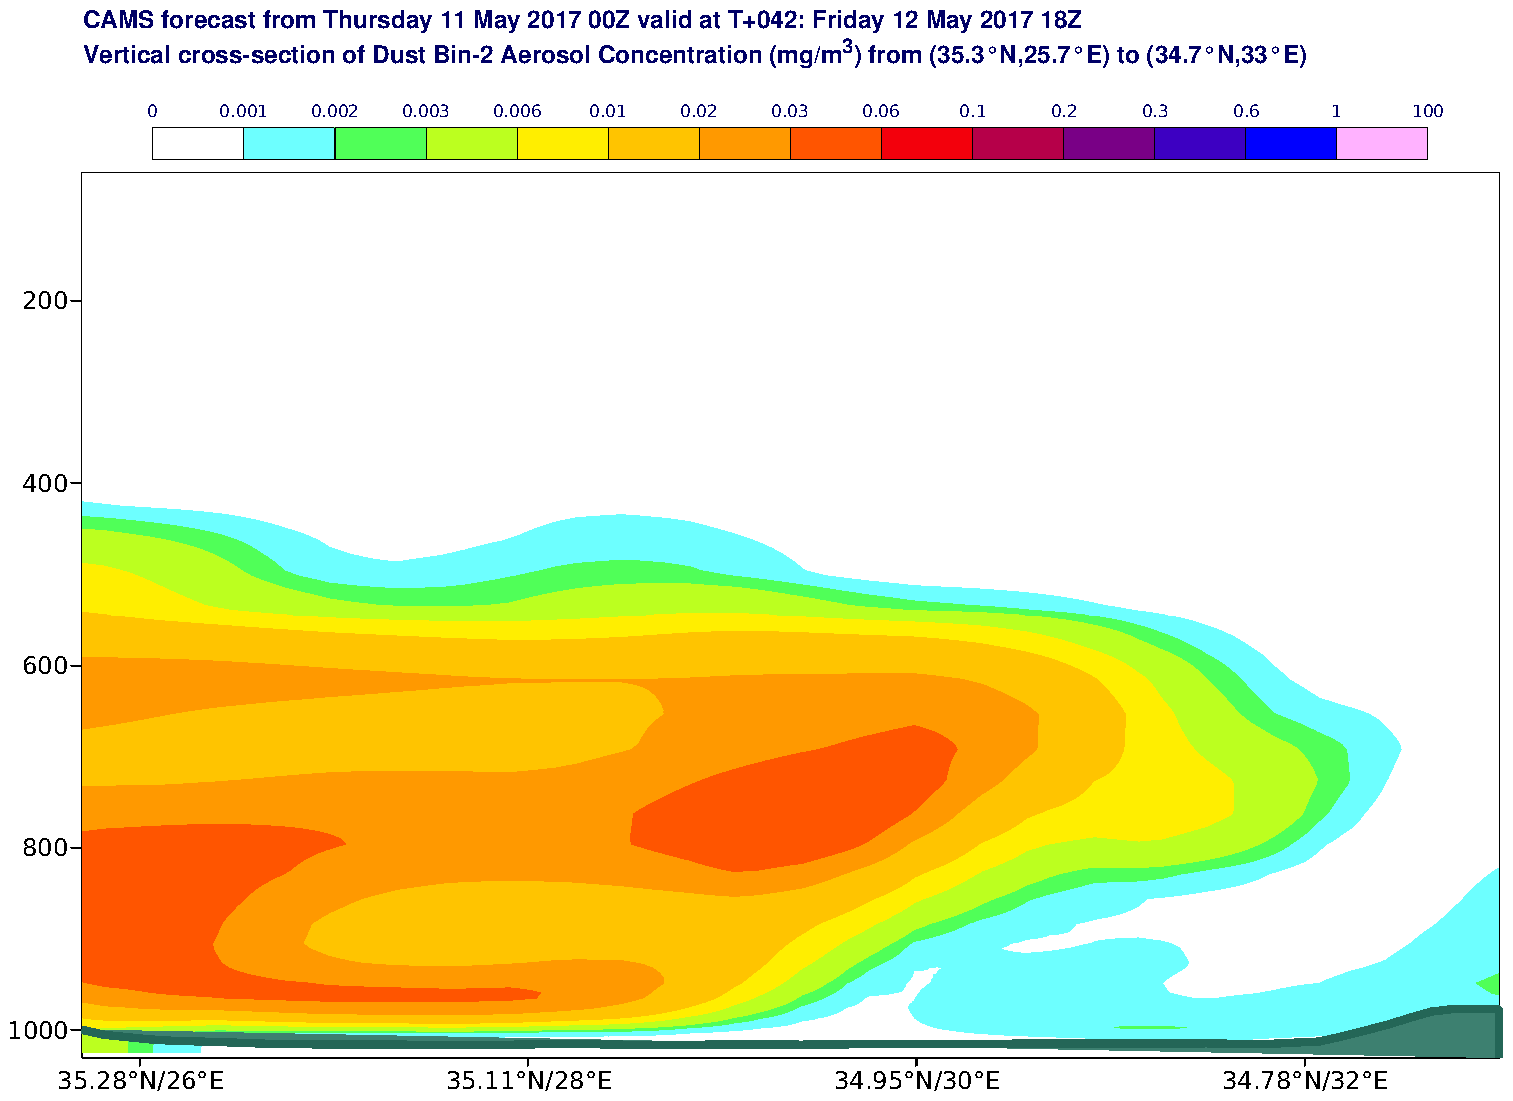 Vertical cross-section of Dust Bin-2 Aerosol Concentration (mg/m3) valid at T42 - 2017-05-12 18:00